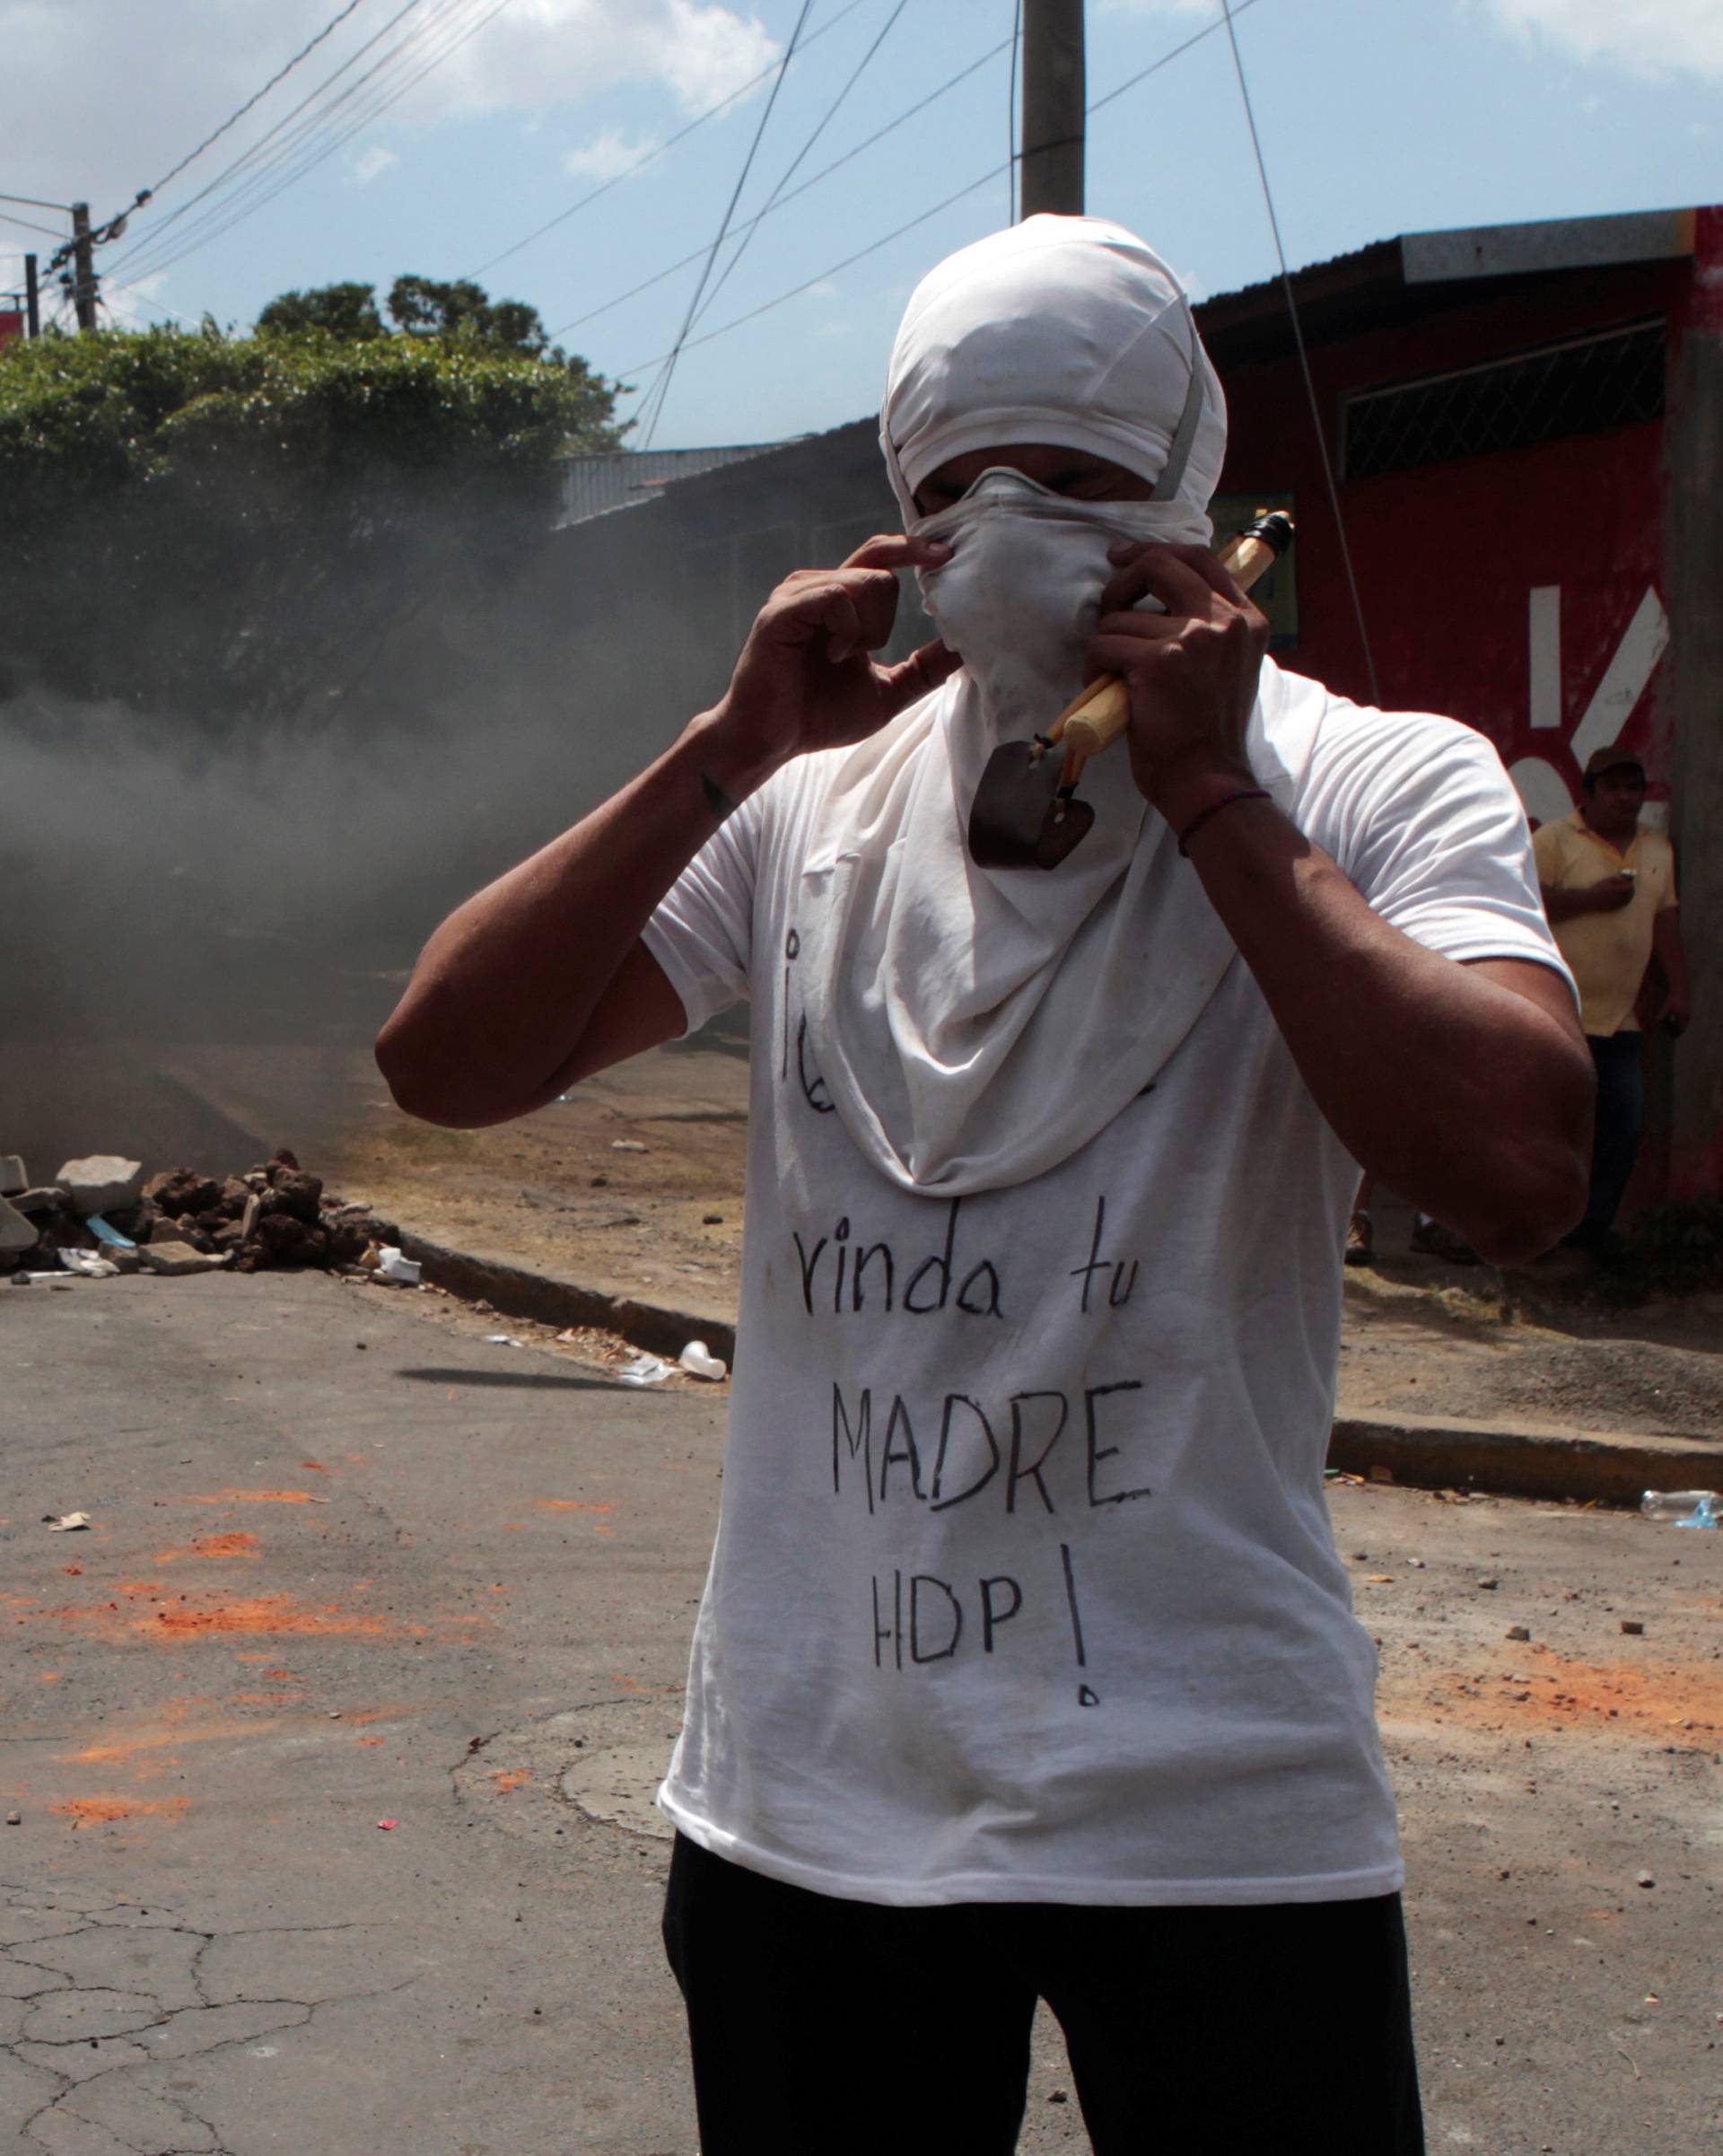 A demonstrator is seen next to a burning barricade during a protest over a controversial reform to the pension plans of the Nicaraguan Social Security Institute (INSS) in Managua